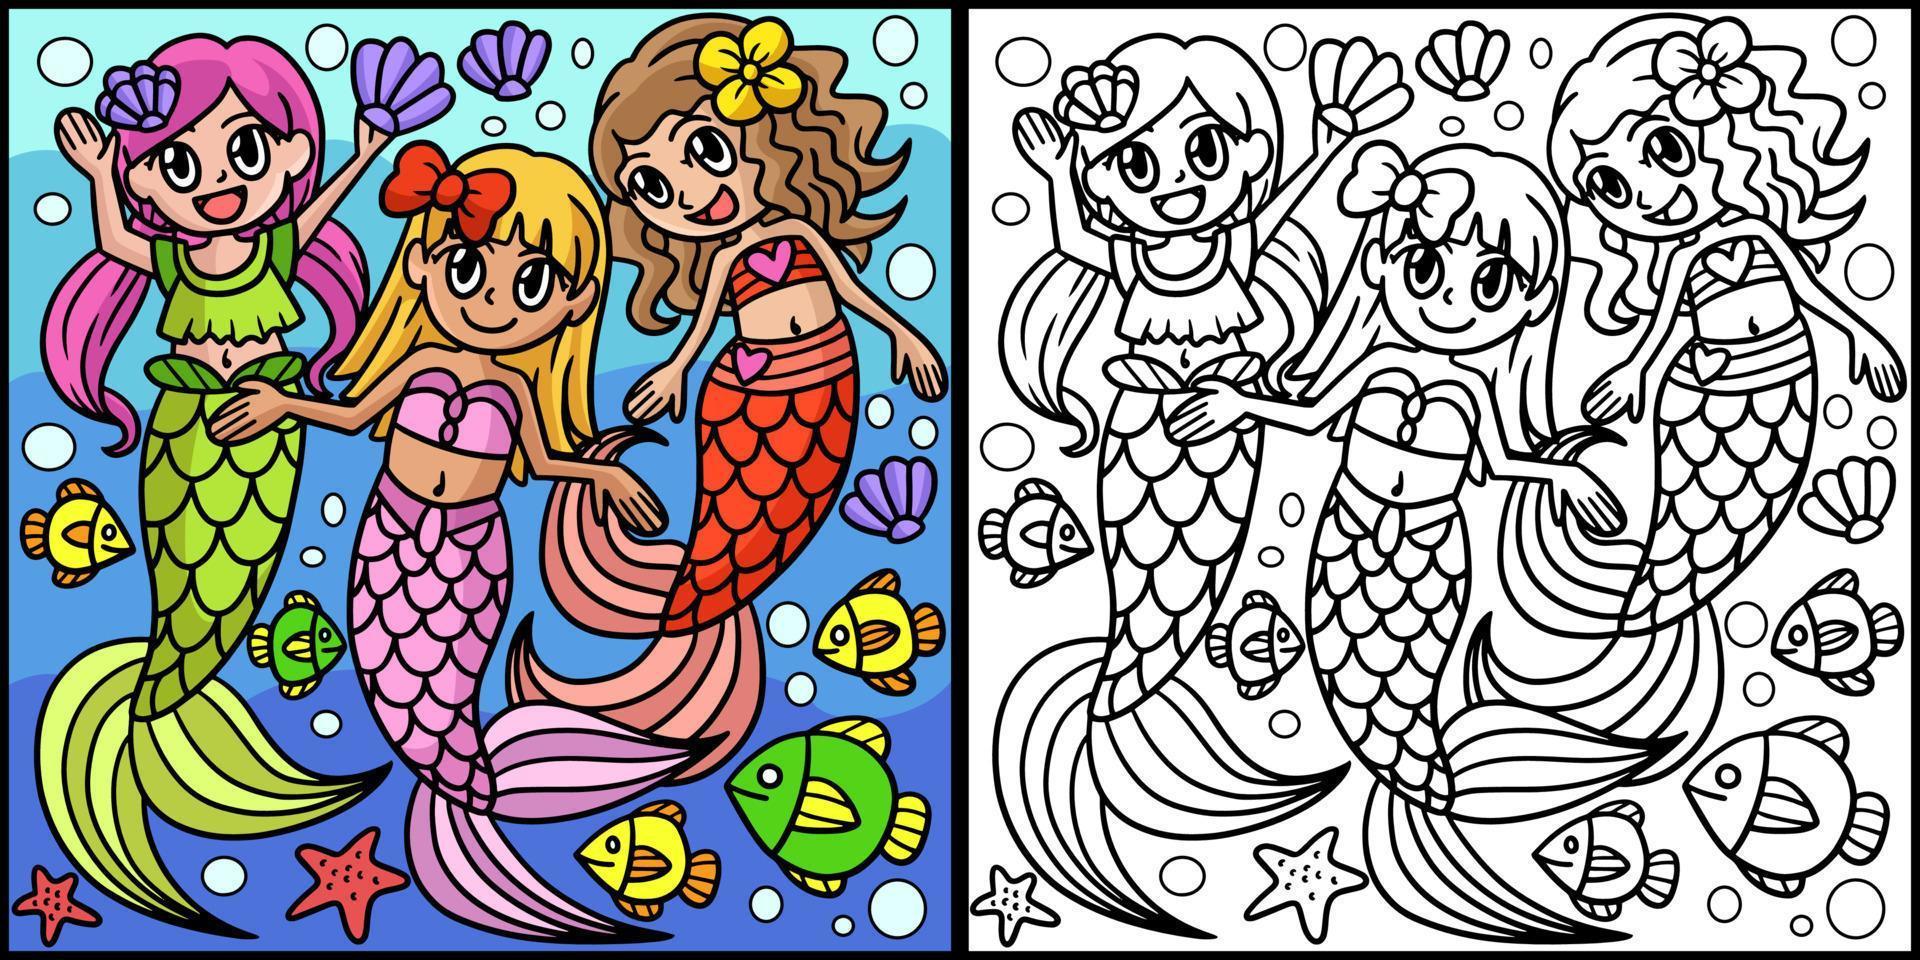 Mermaid With Friends Colored Illustration vector